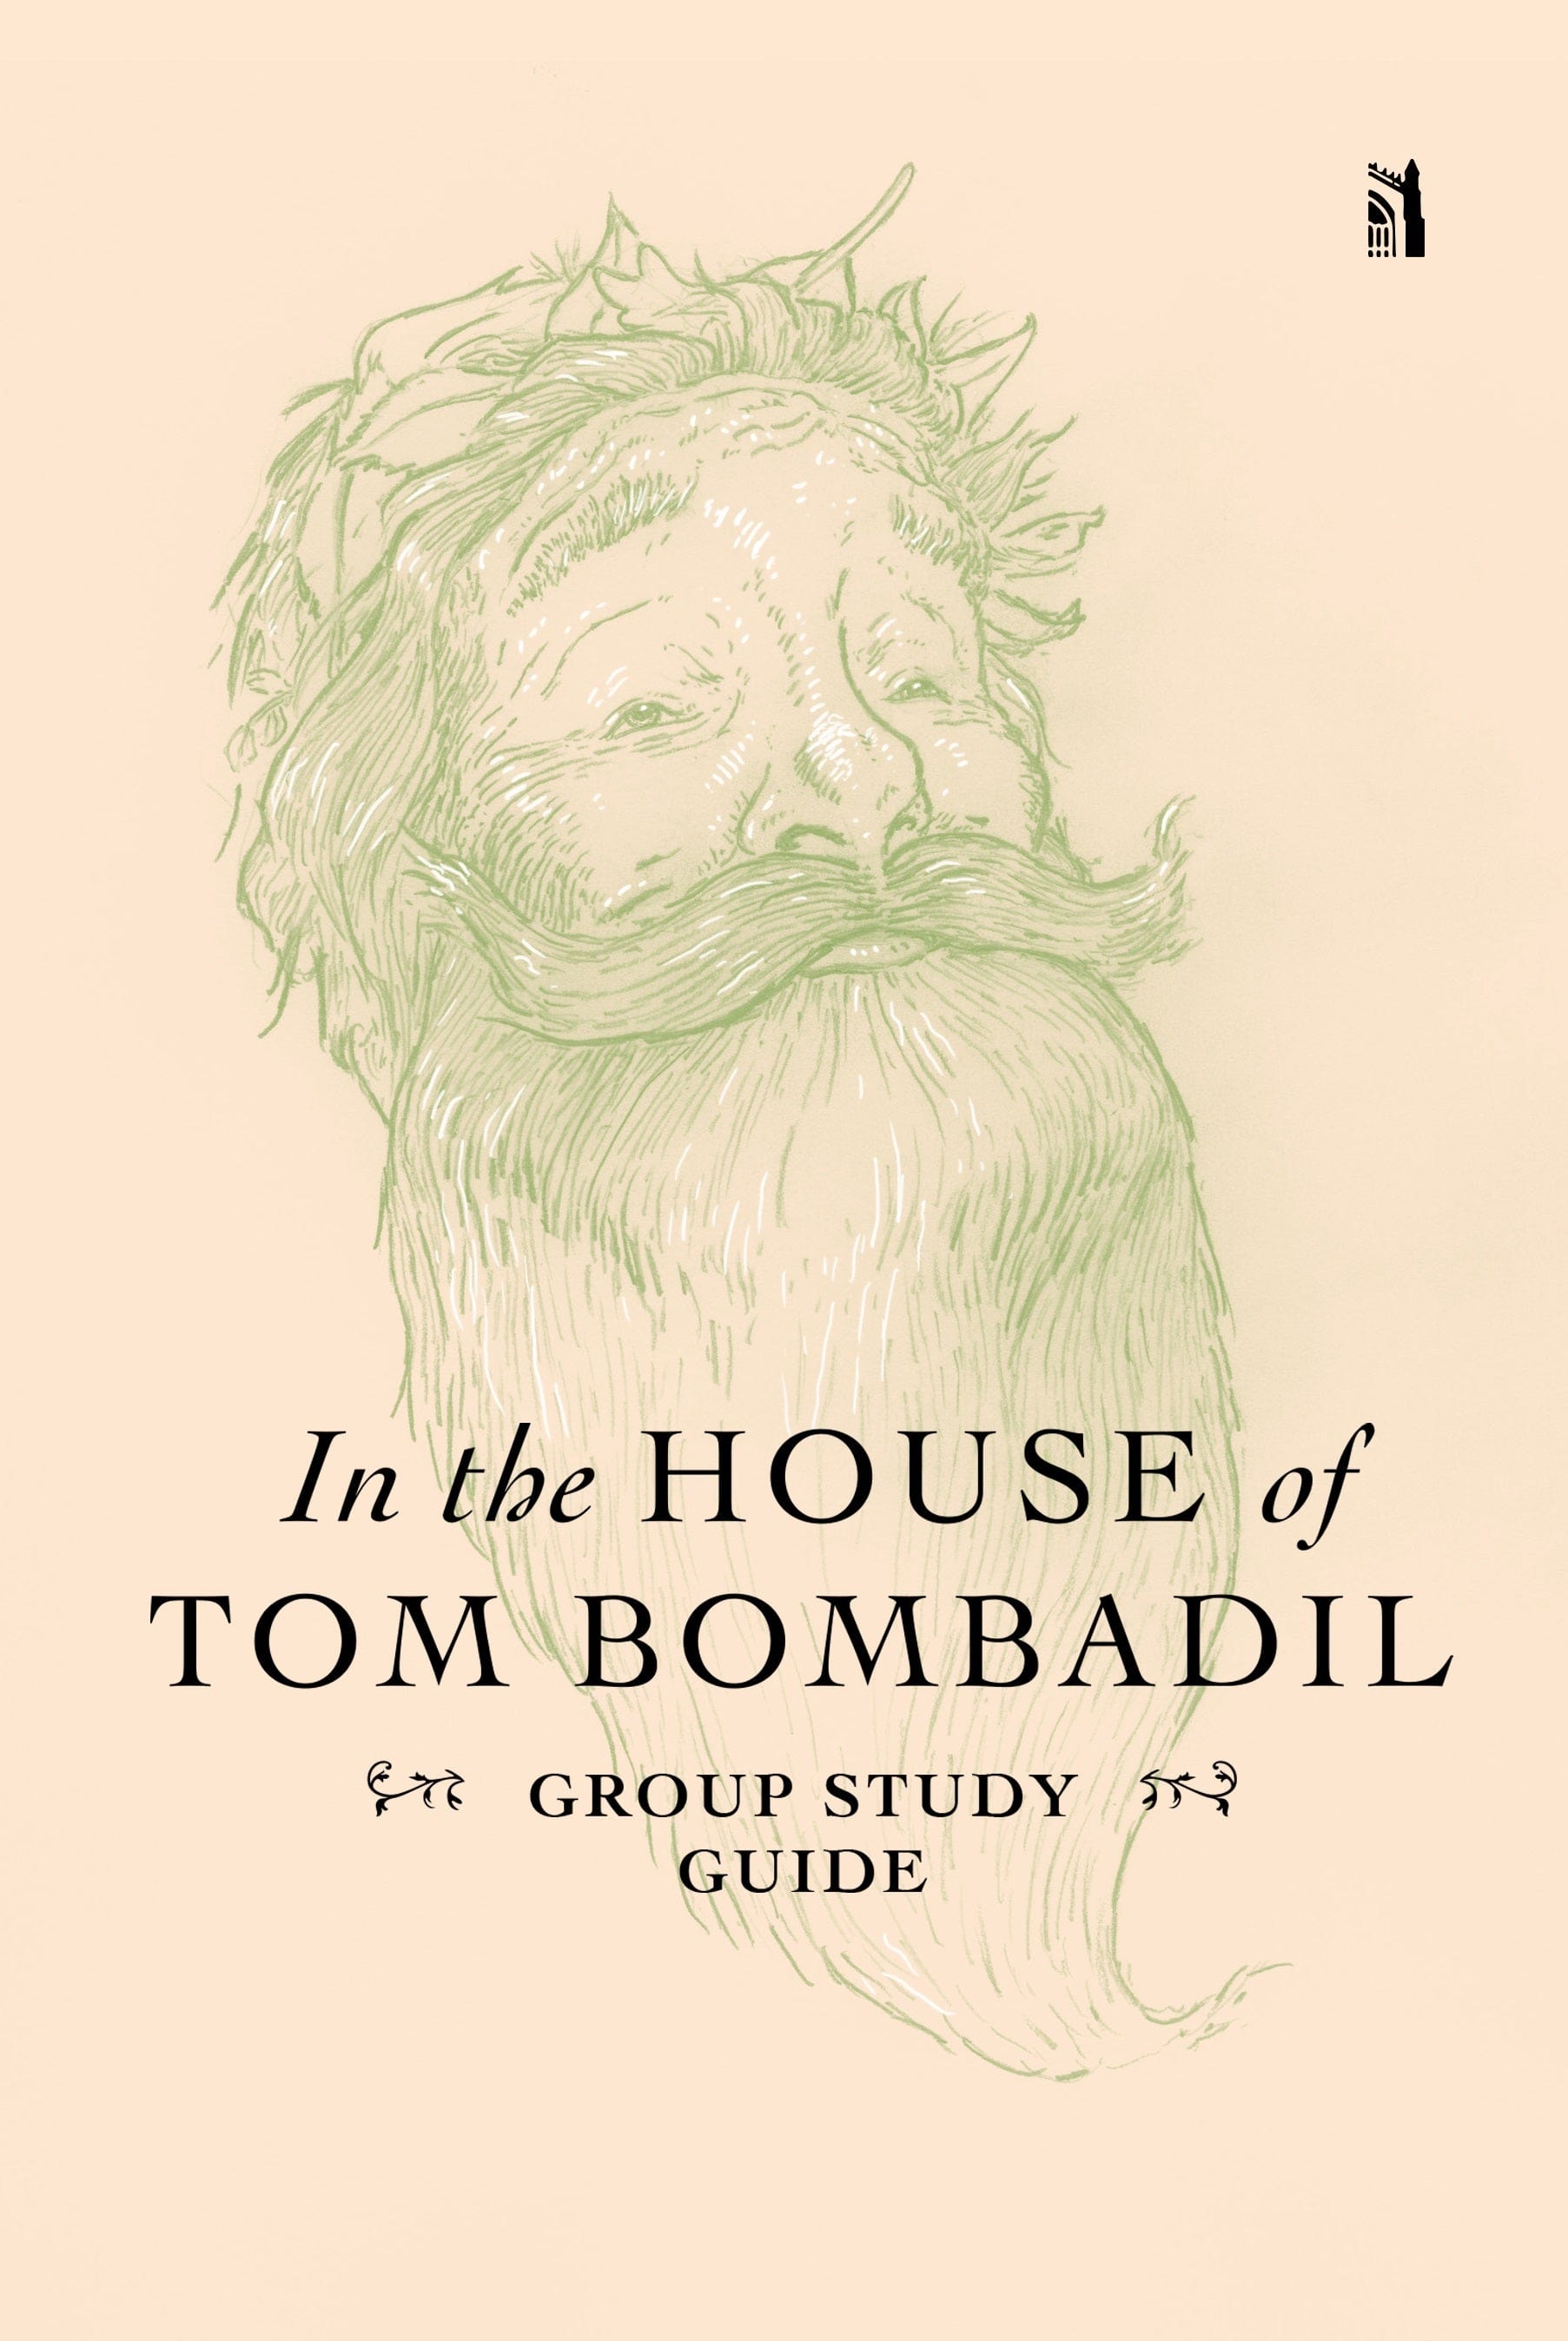 In the House of Tom Bombadil Group Study Guide